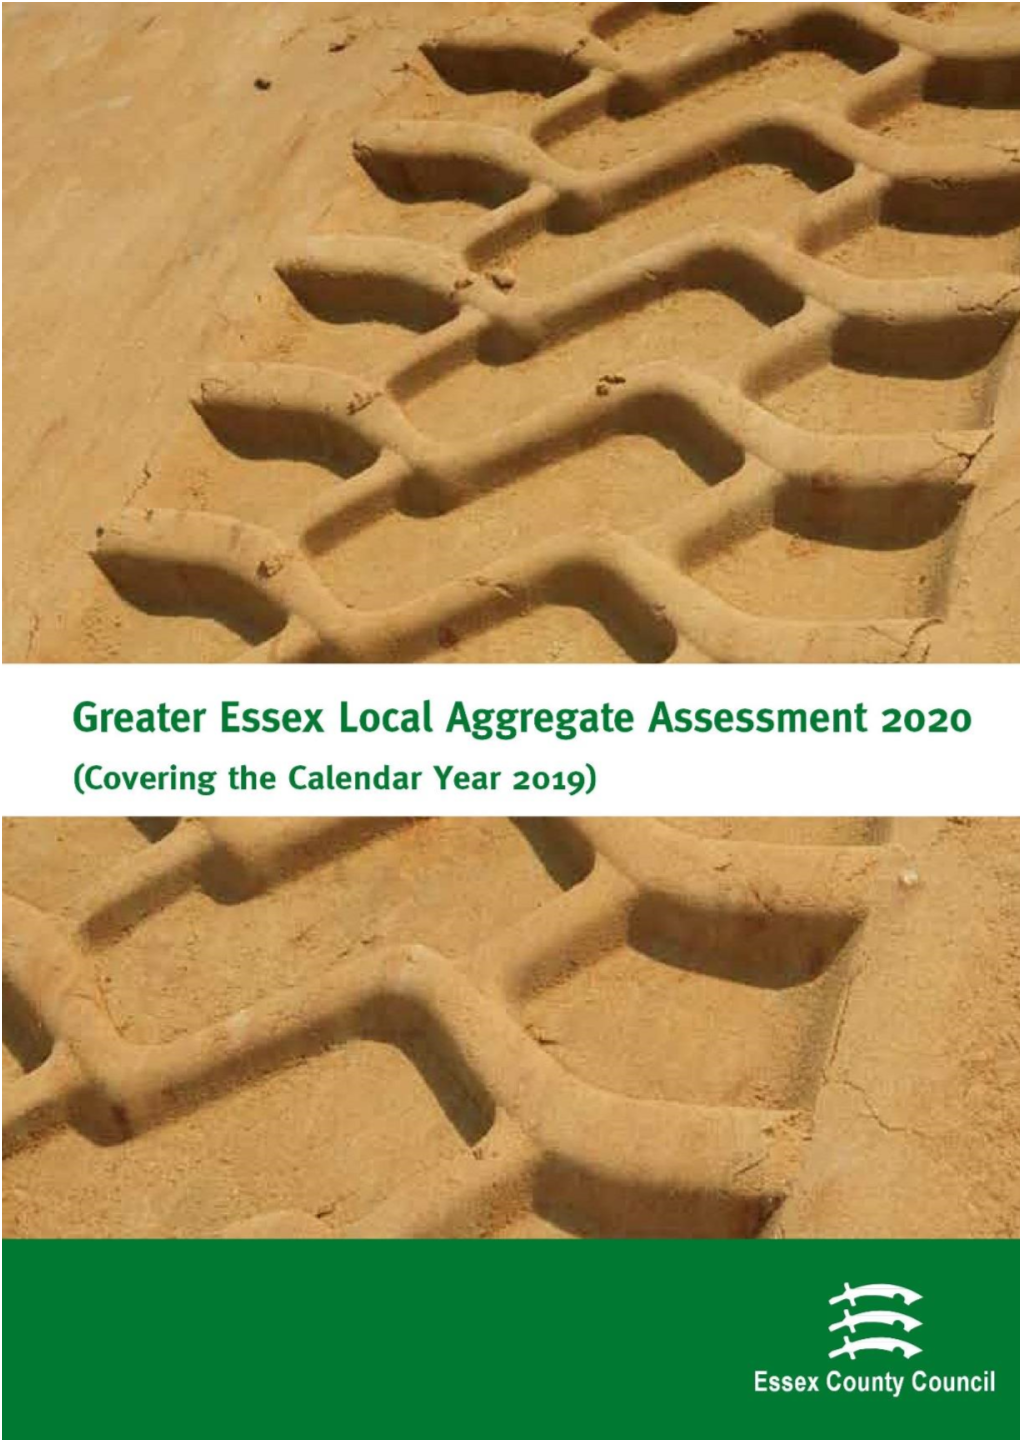 Greater Essex Local Aggregate Assessment October 2020